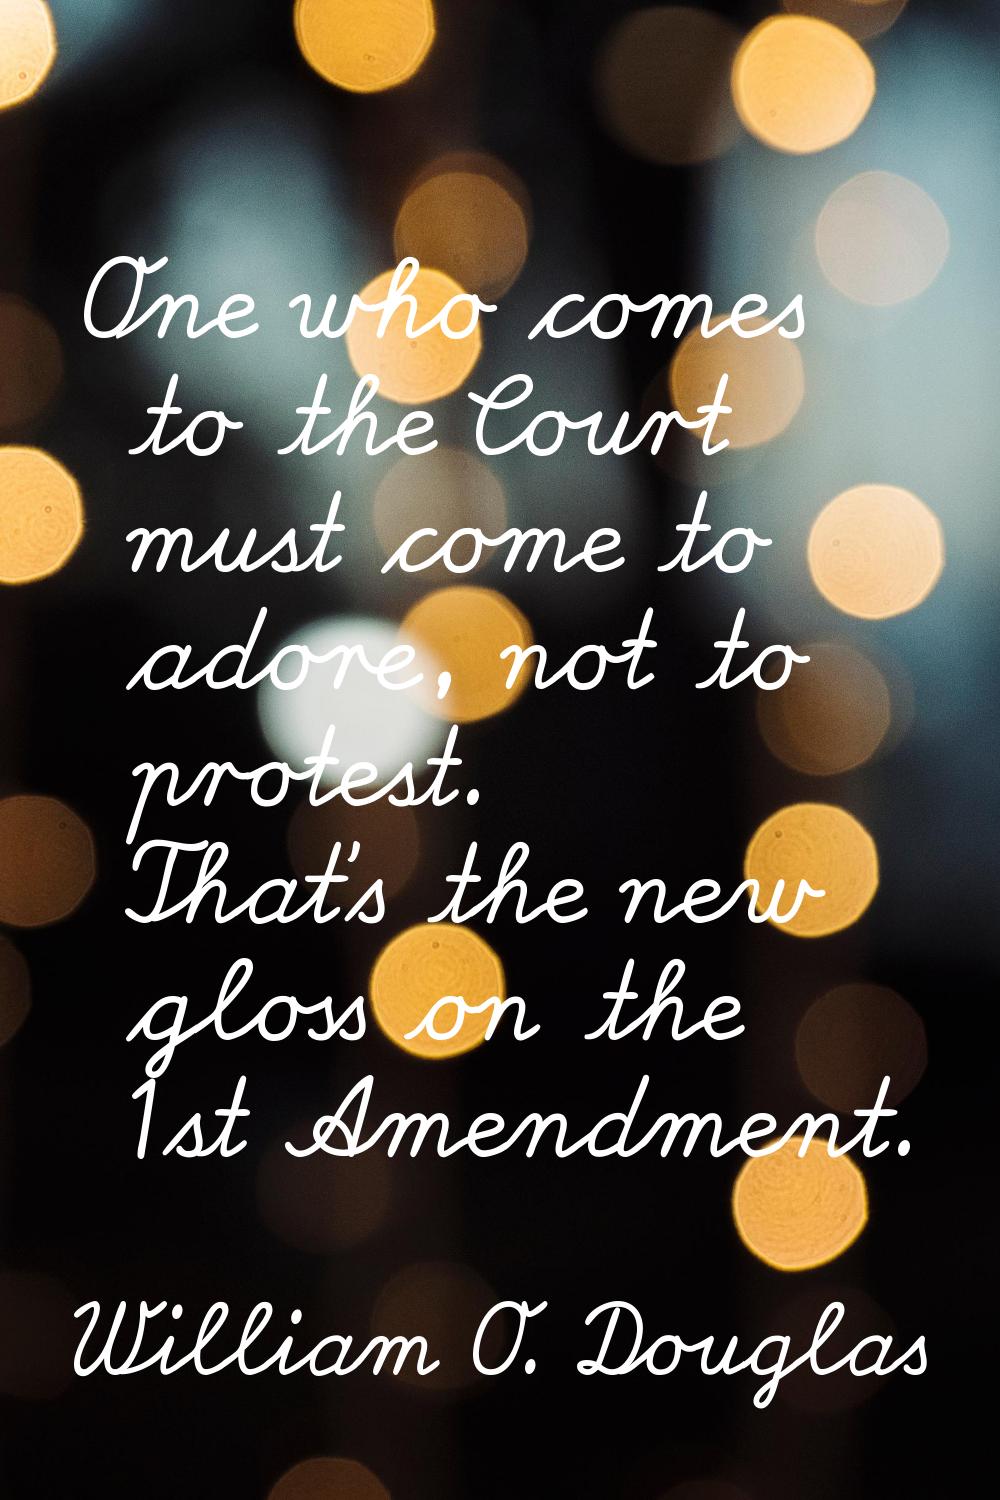 One who comes to the Court must come to adore, not to protest. That's the new gloss on the 1st Amen